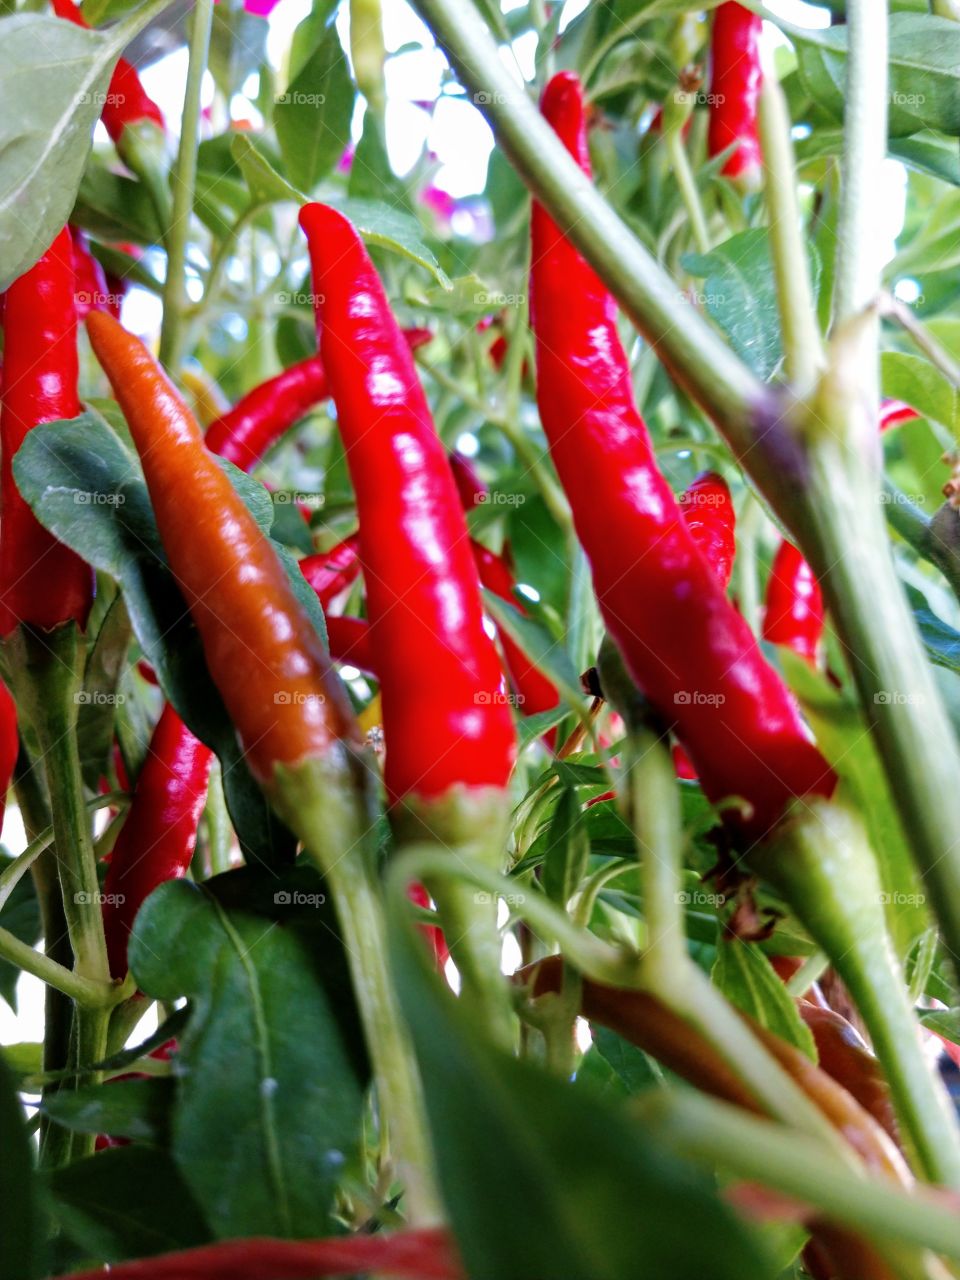 garden chili peppers